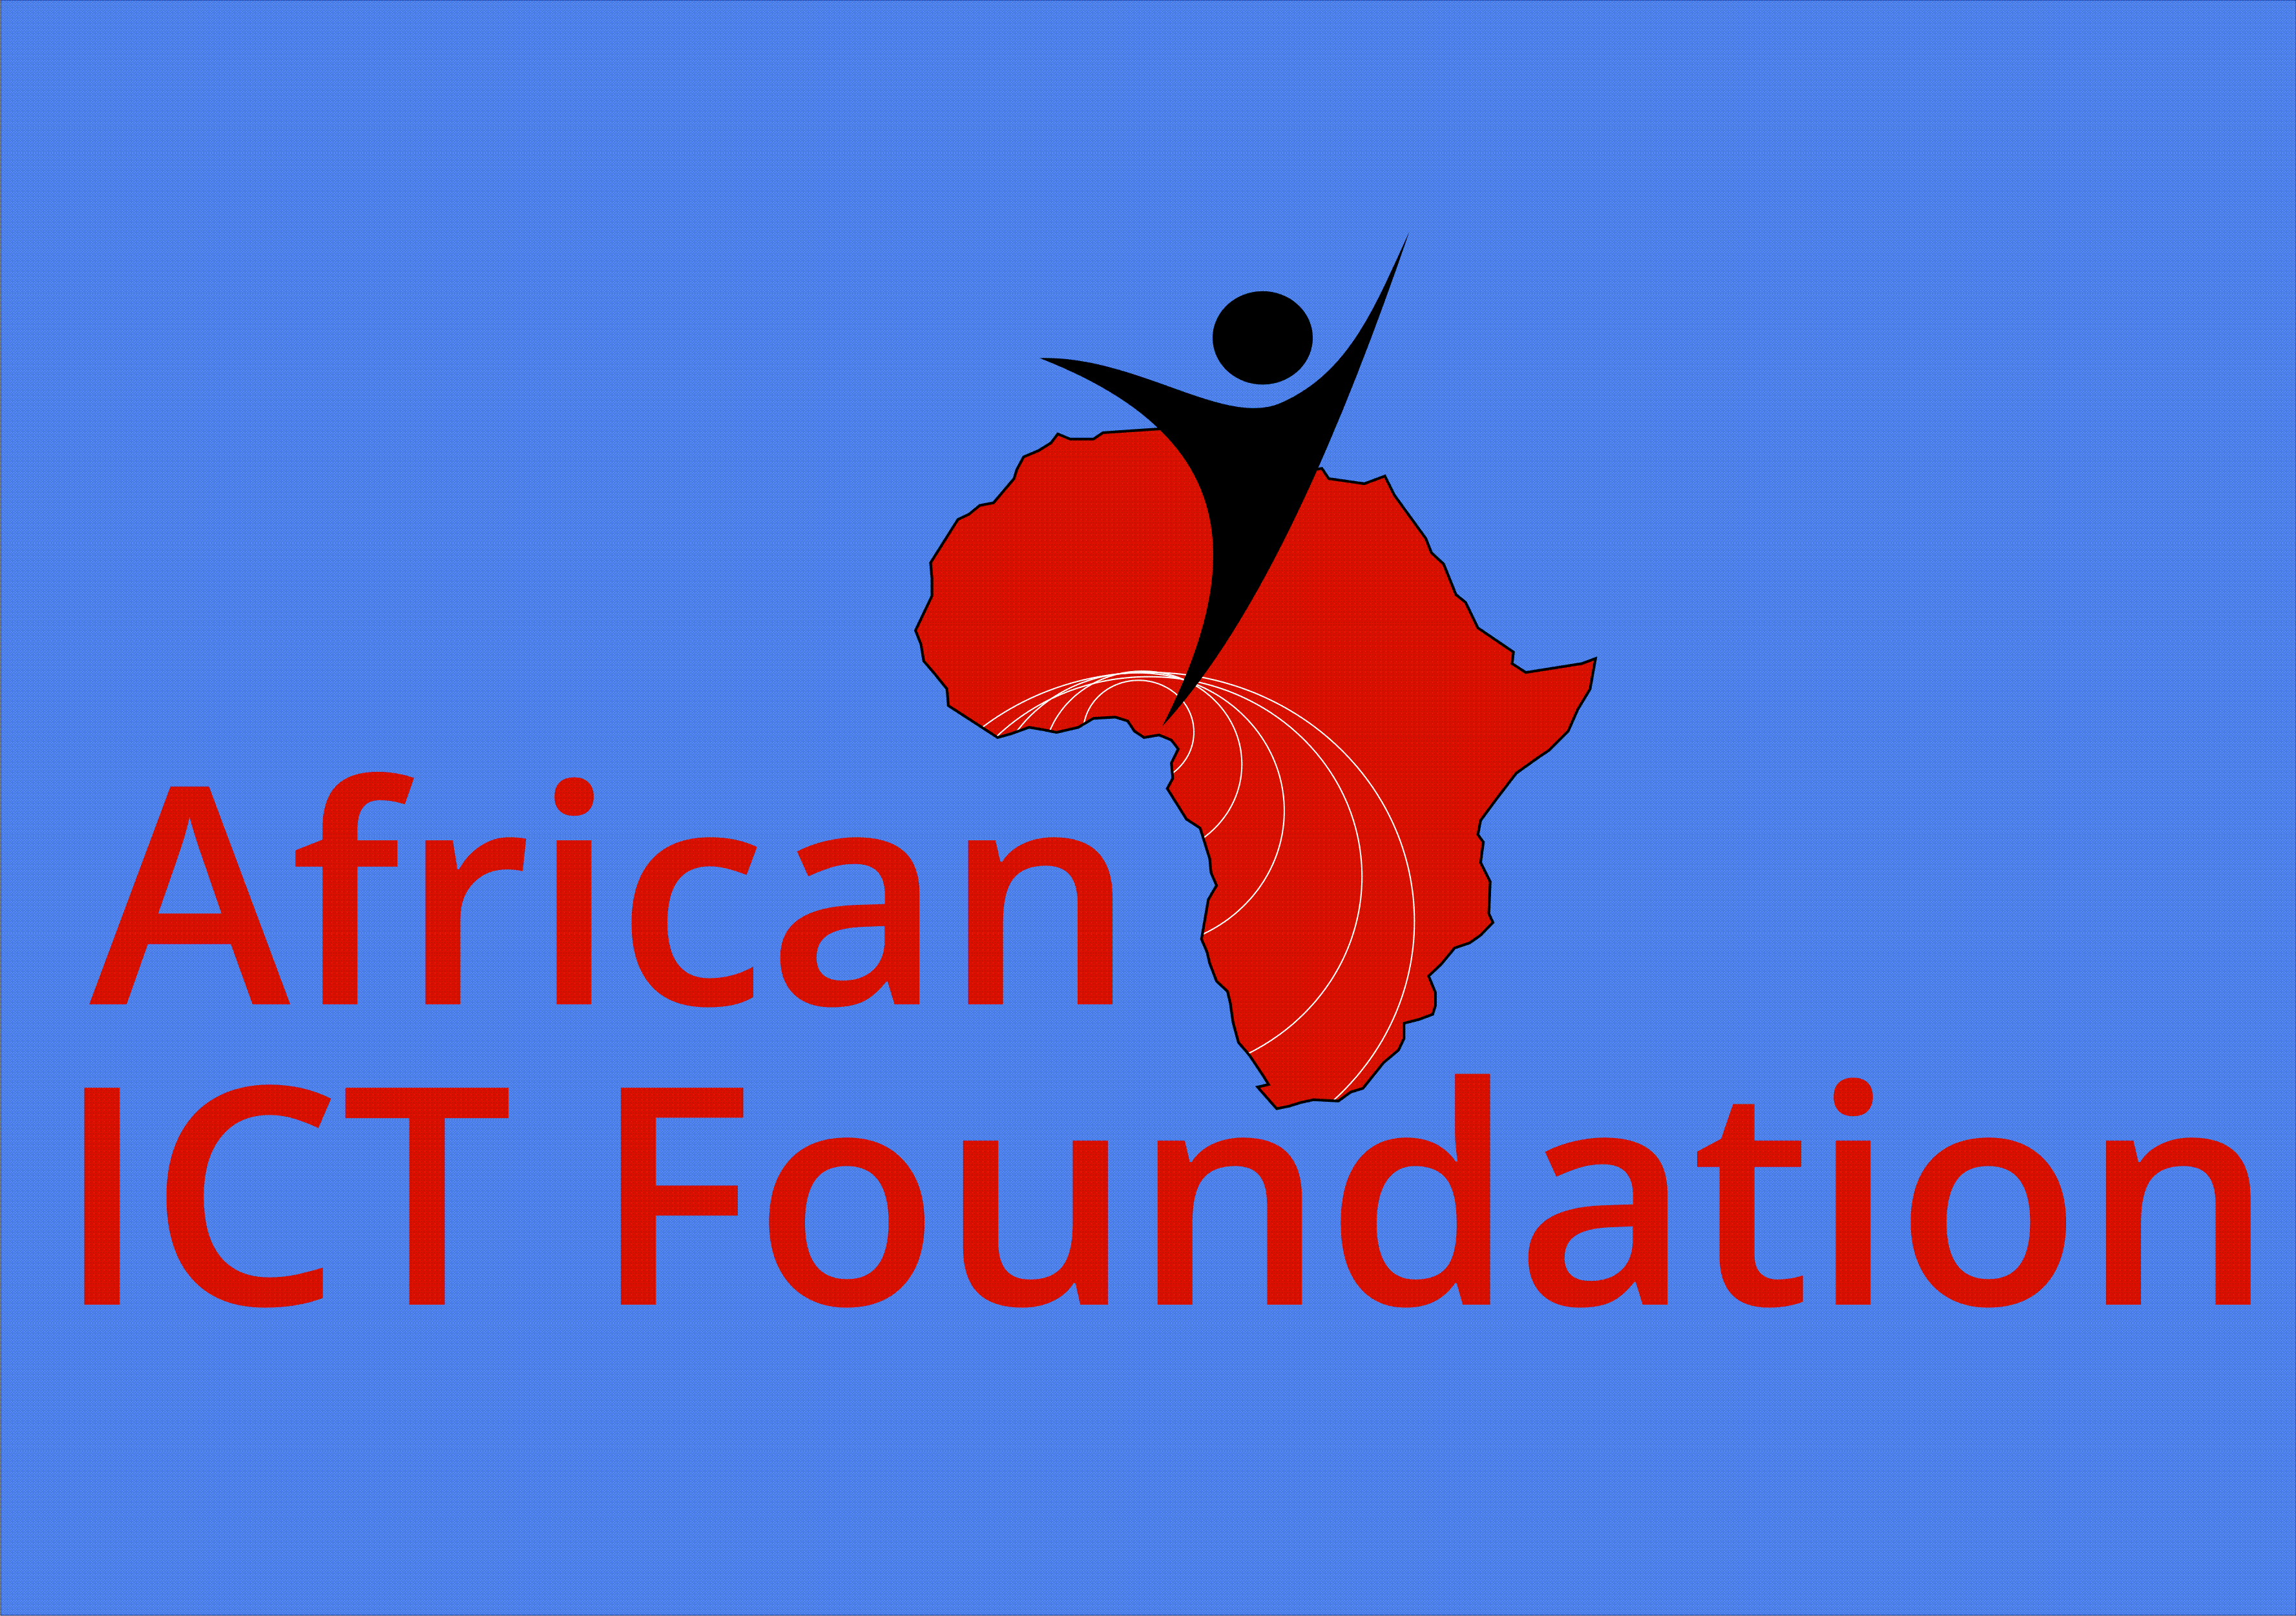 African ICT Foundation opens application for volunteers tech trainers